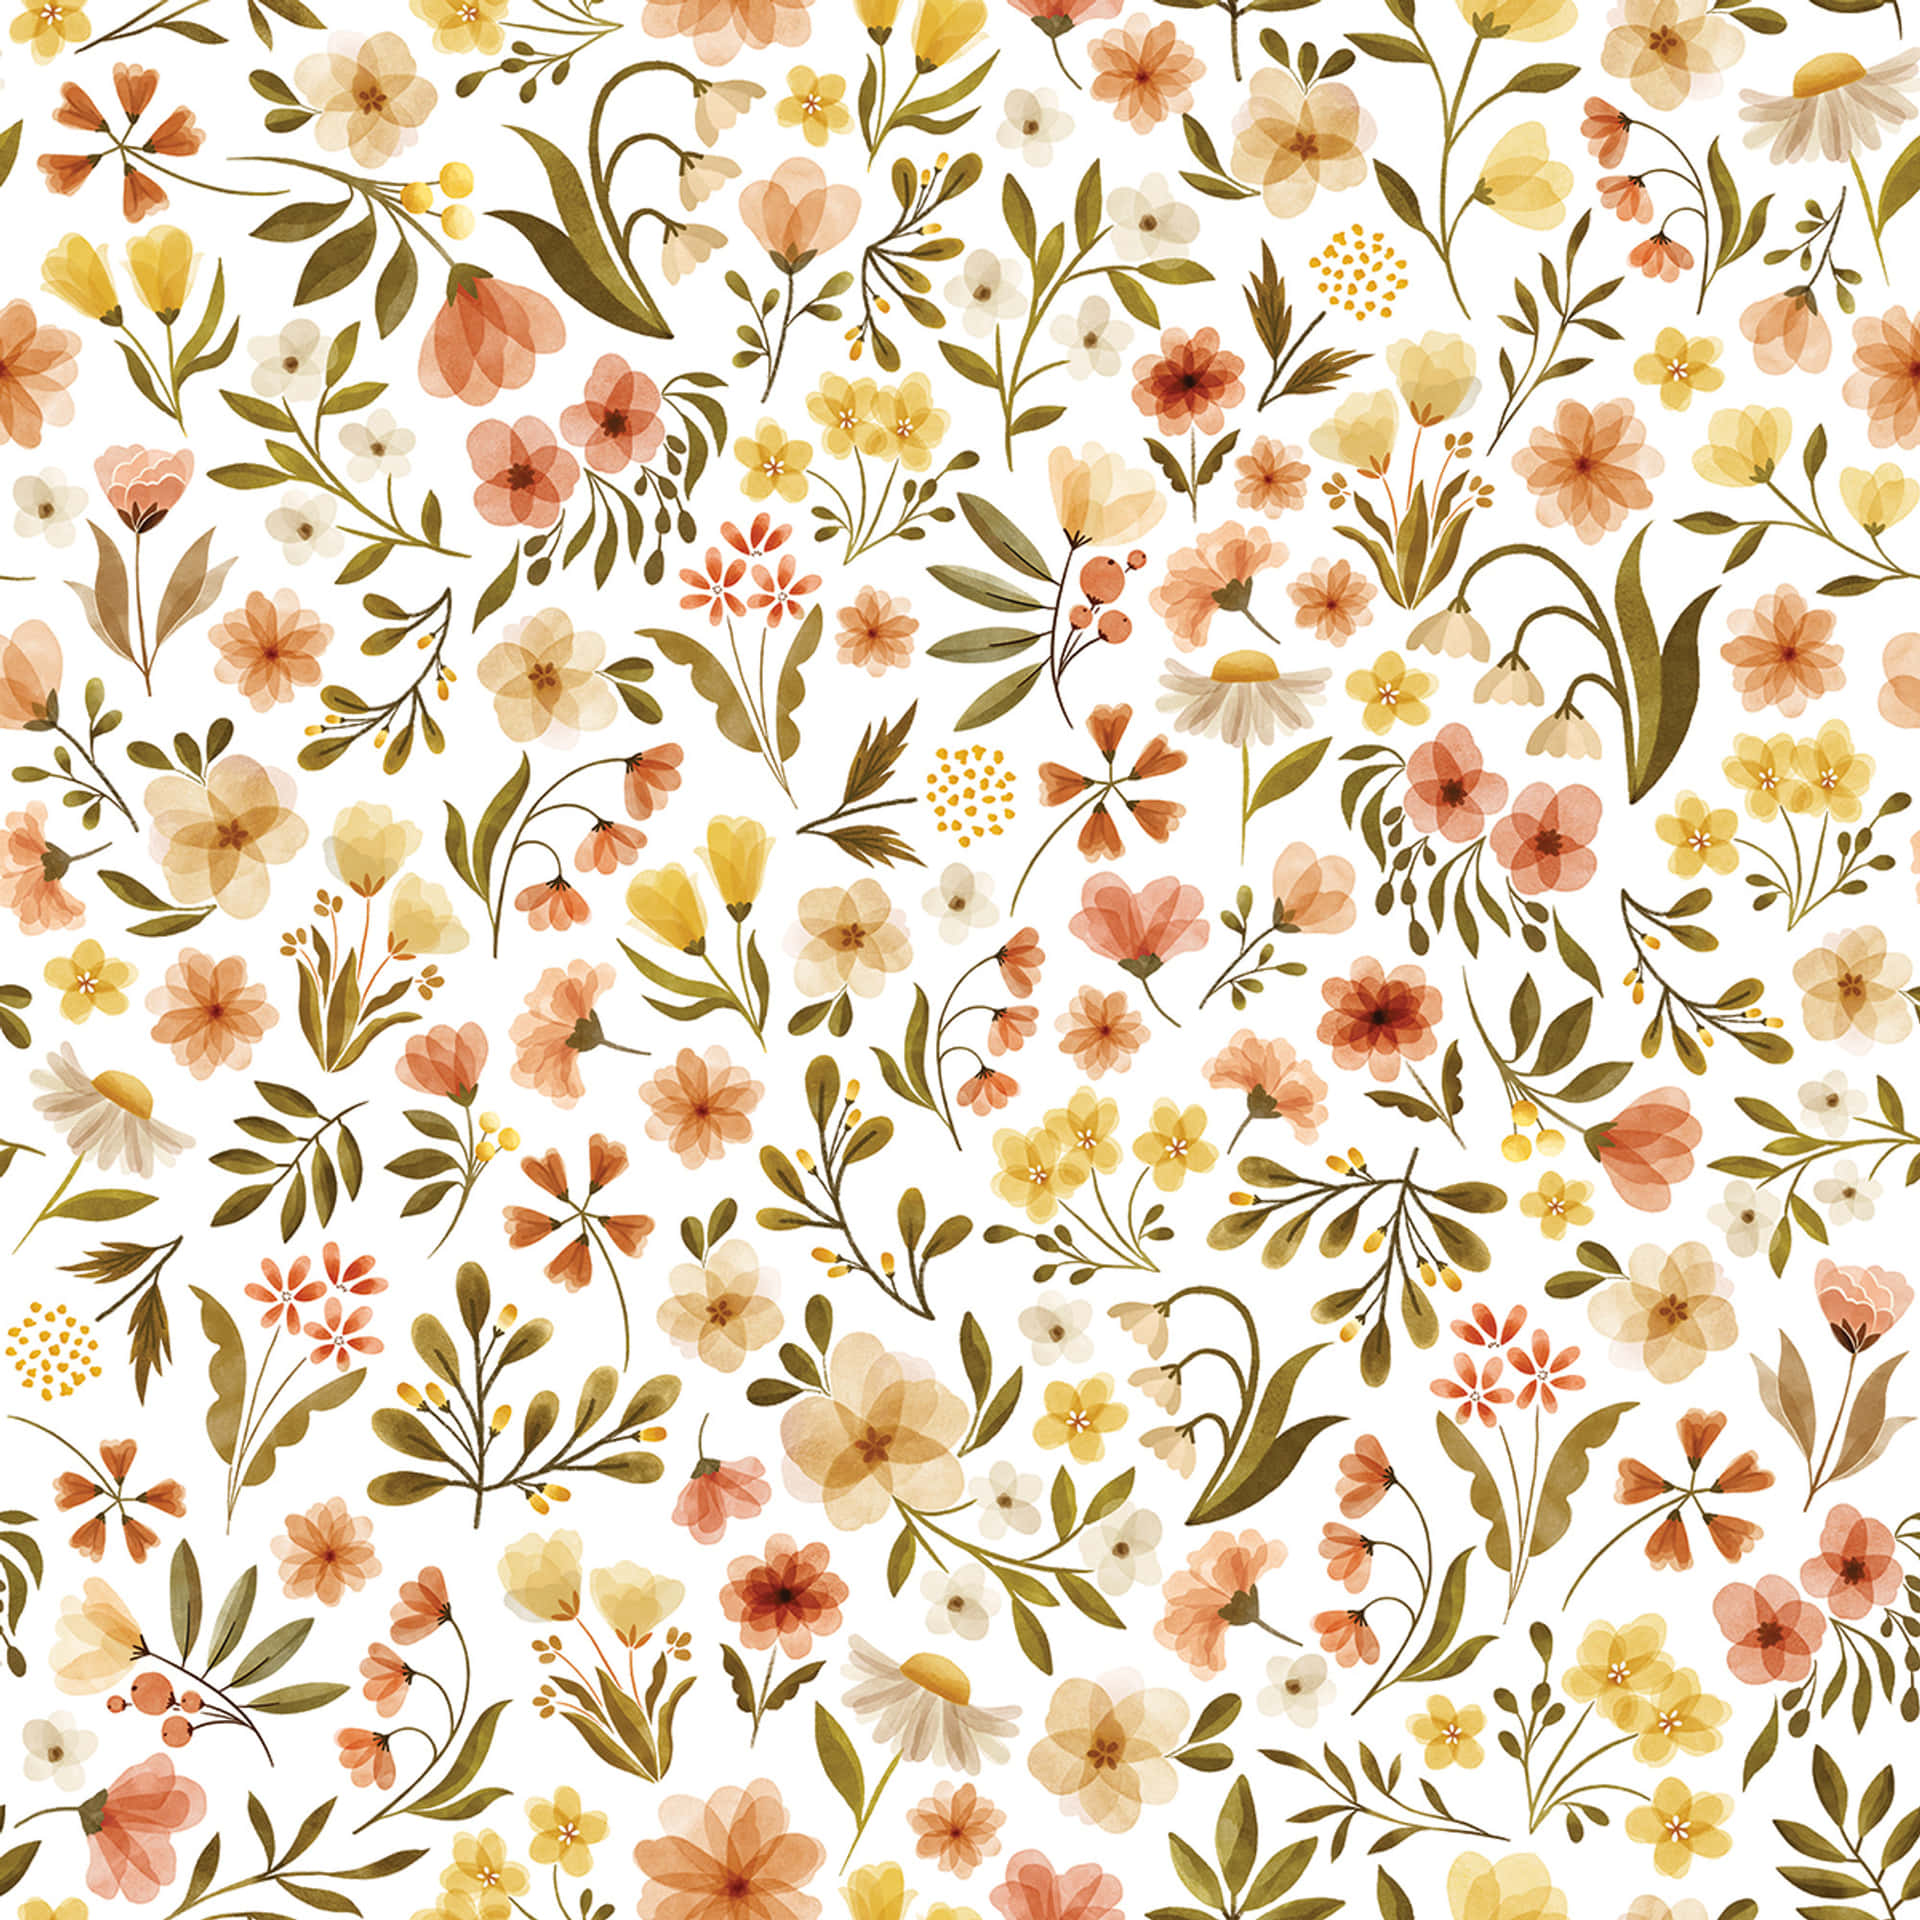 A Floral Pattern With Yellow And Brown Flowers